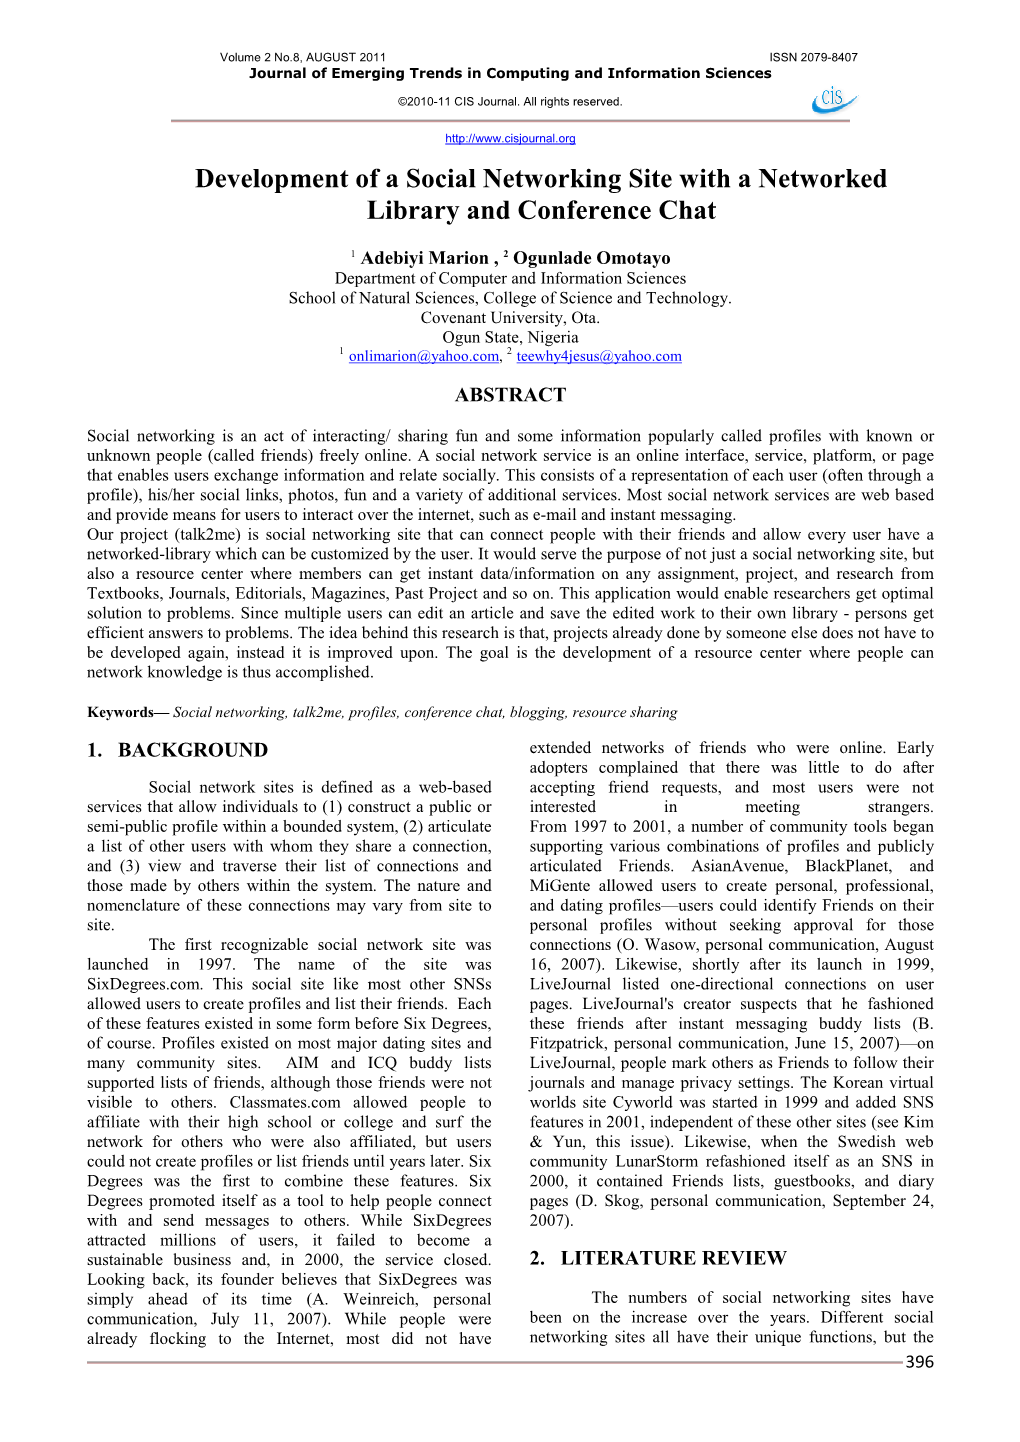 Journal of Computing Development of a Social Networking Site with A